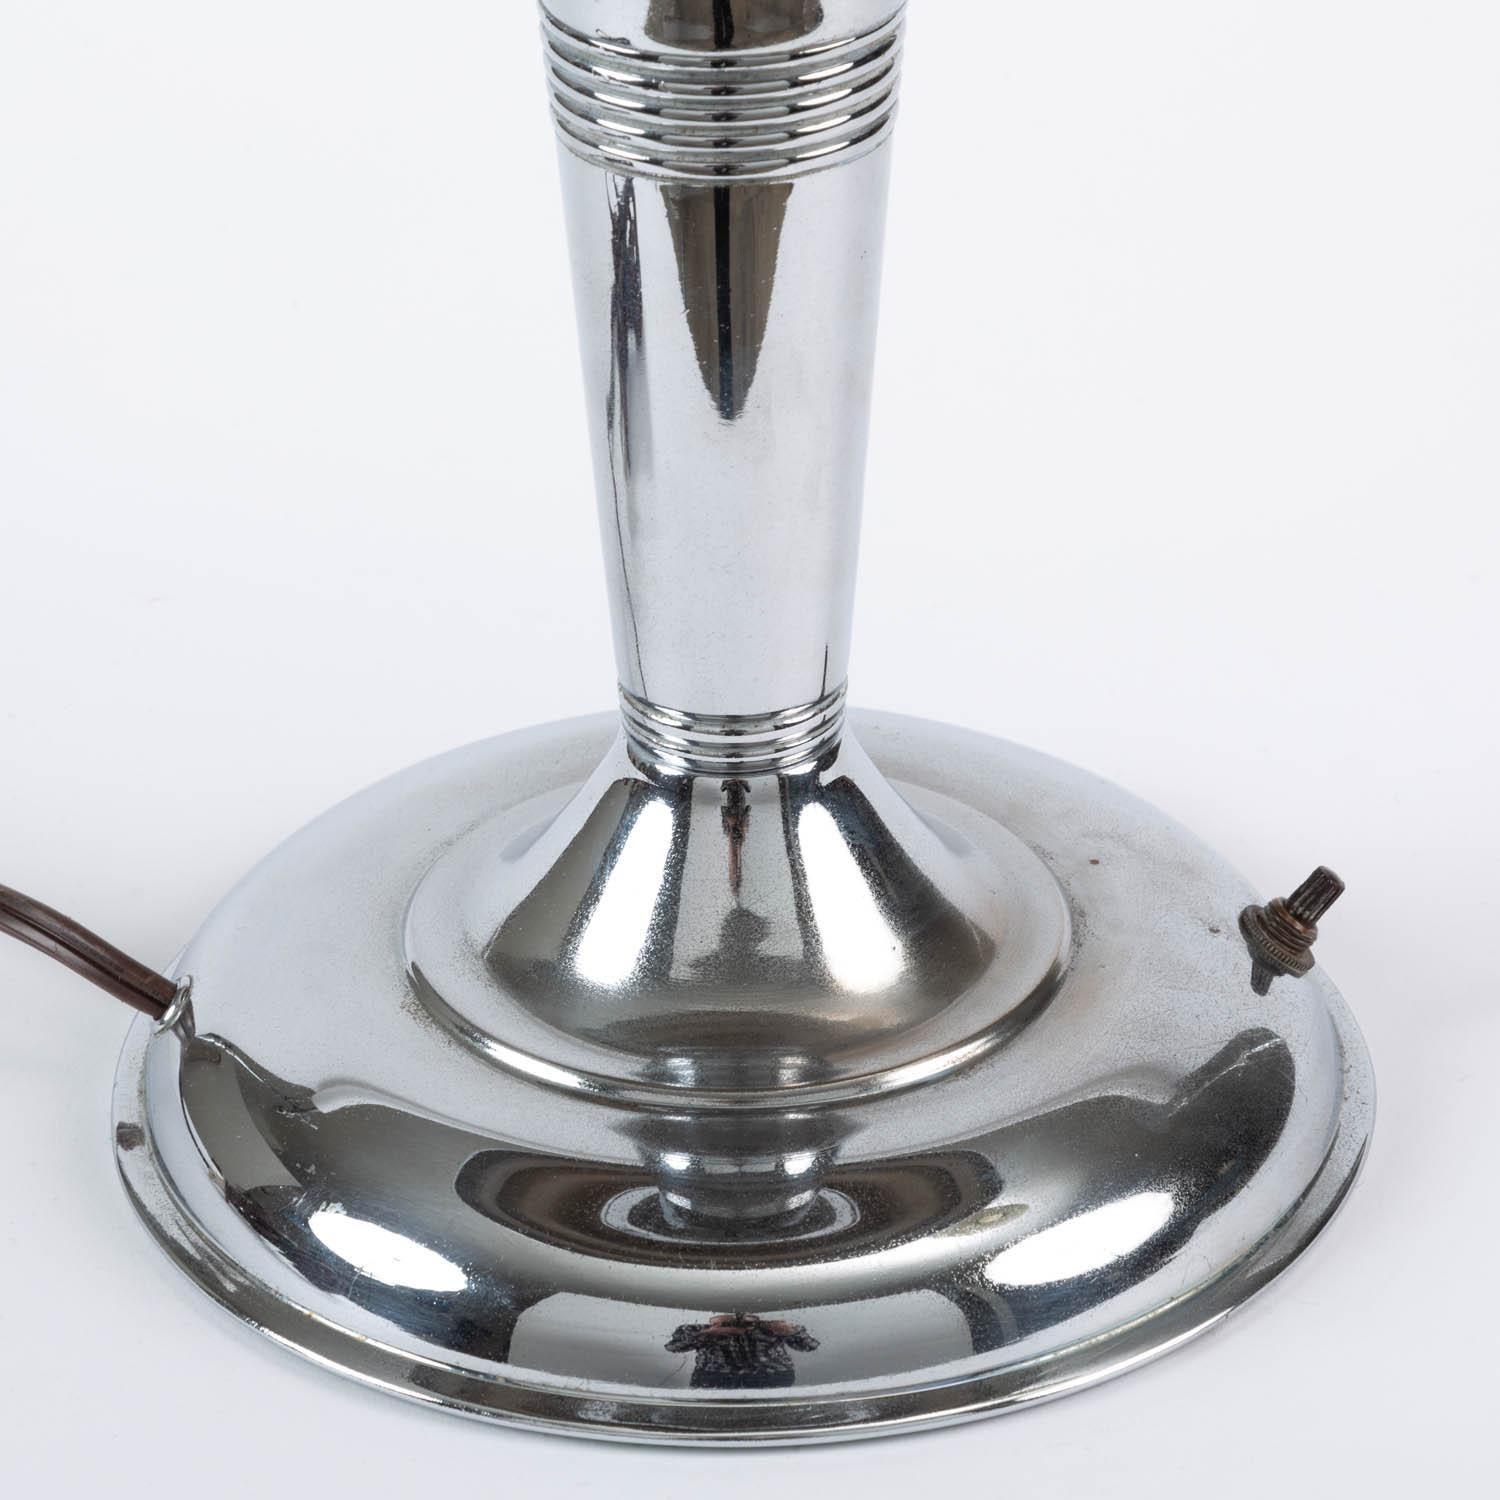 20th Century Chrome Art Deco Table Lamp with Saucer Shade